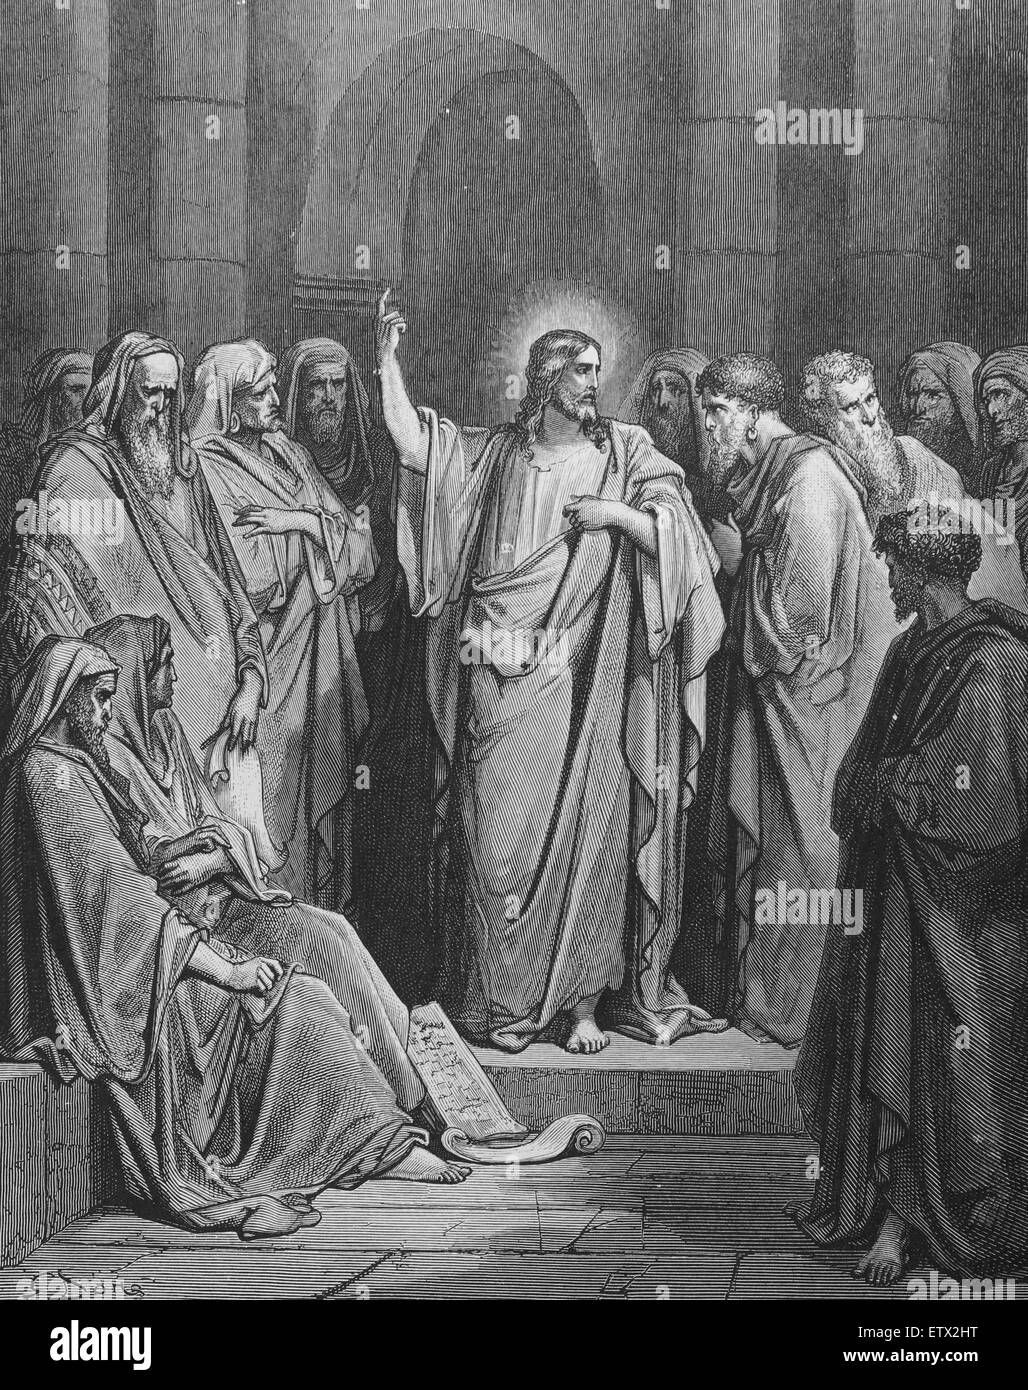 New Testament. Christ in the Synagogue. Matthew 13: 54, 55. Engraving by Gustave Dore. 19th century. Stock Photo